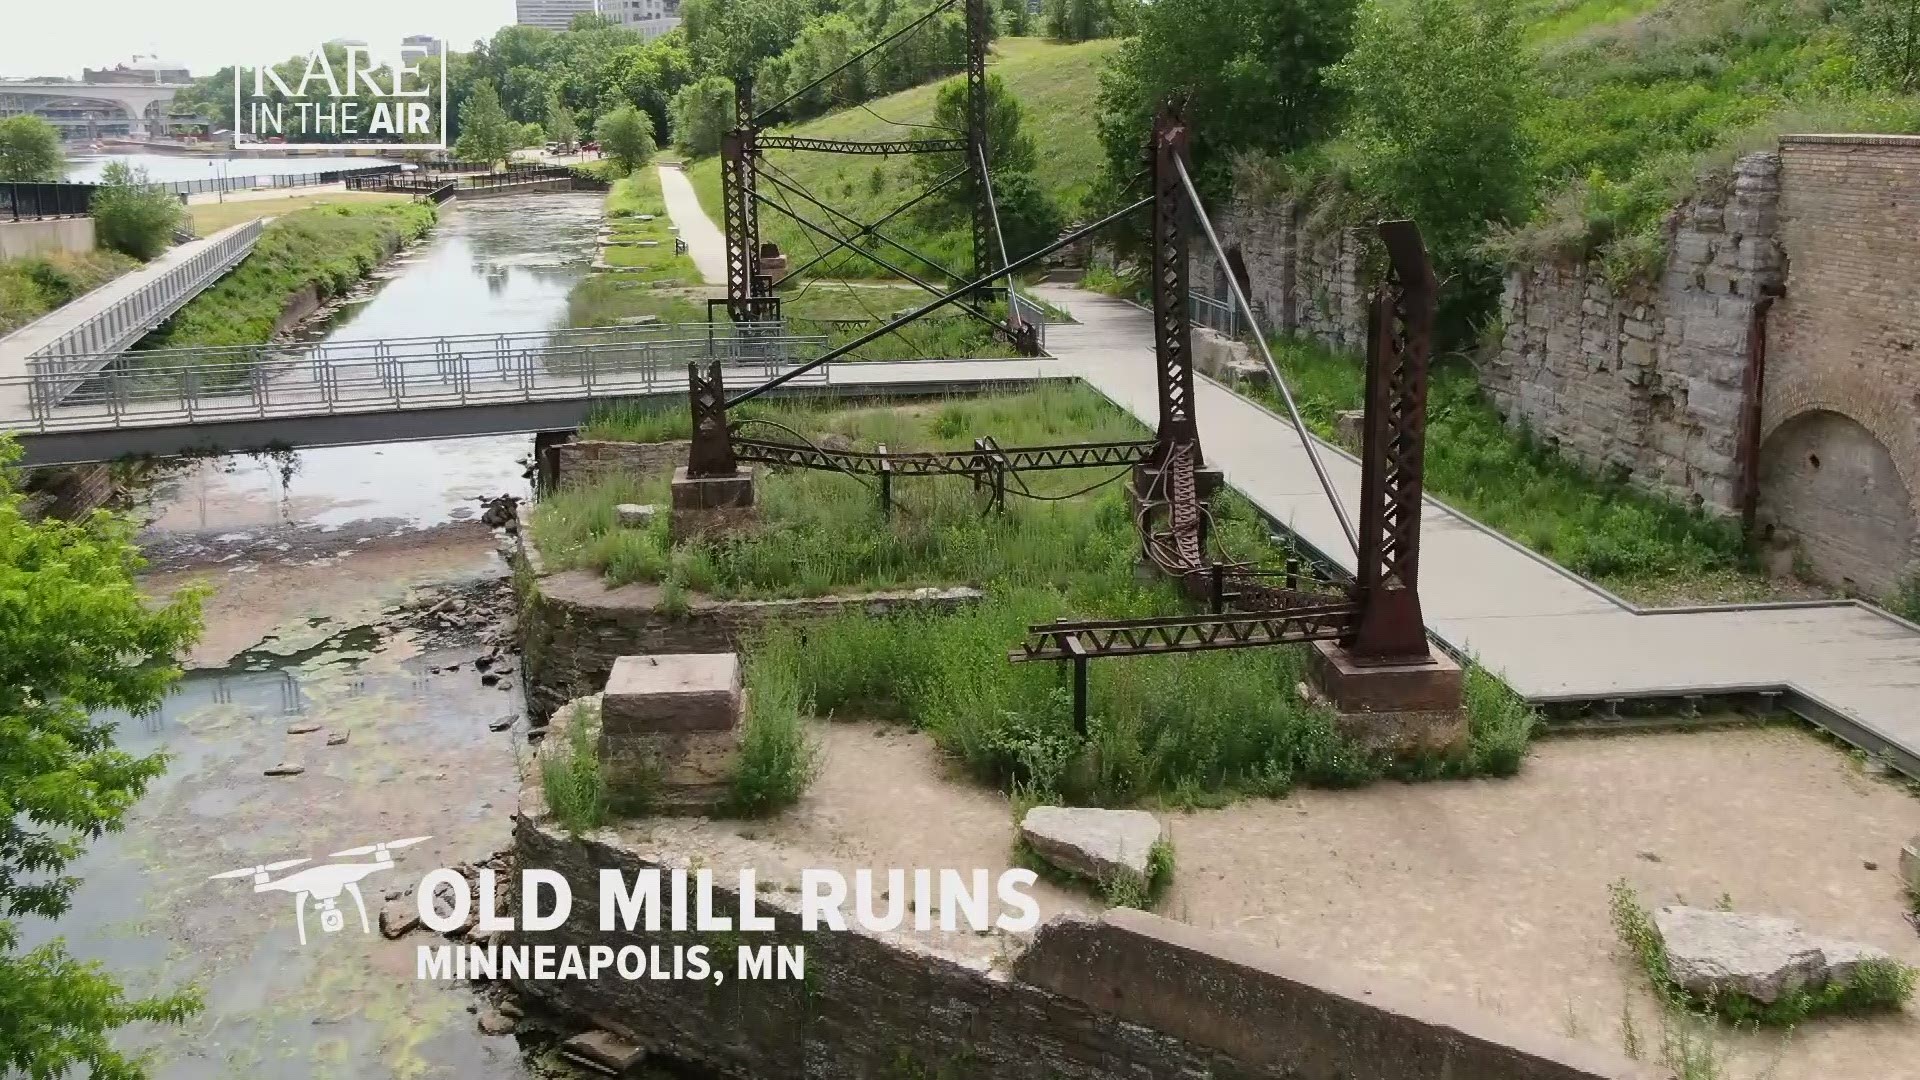 Our summer drone series takes us above the historic site along the Mississippi River, where flour and saw mills stood in the 19th century.